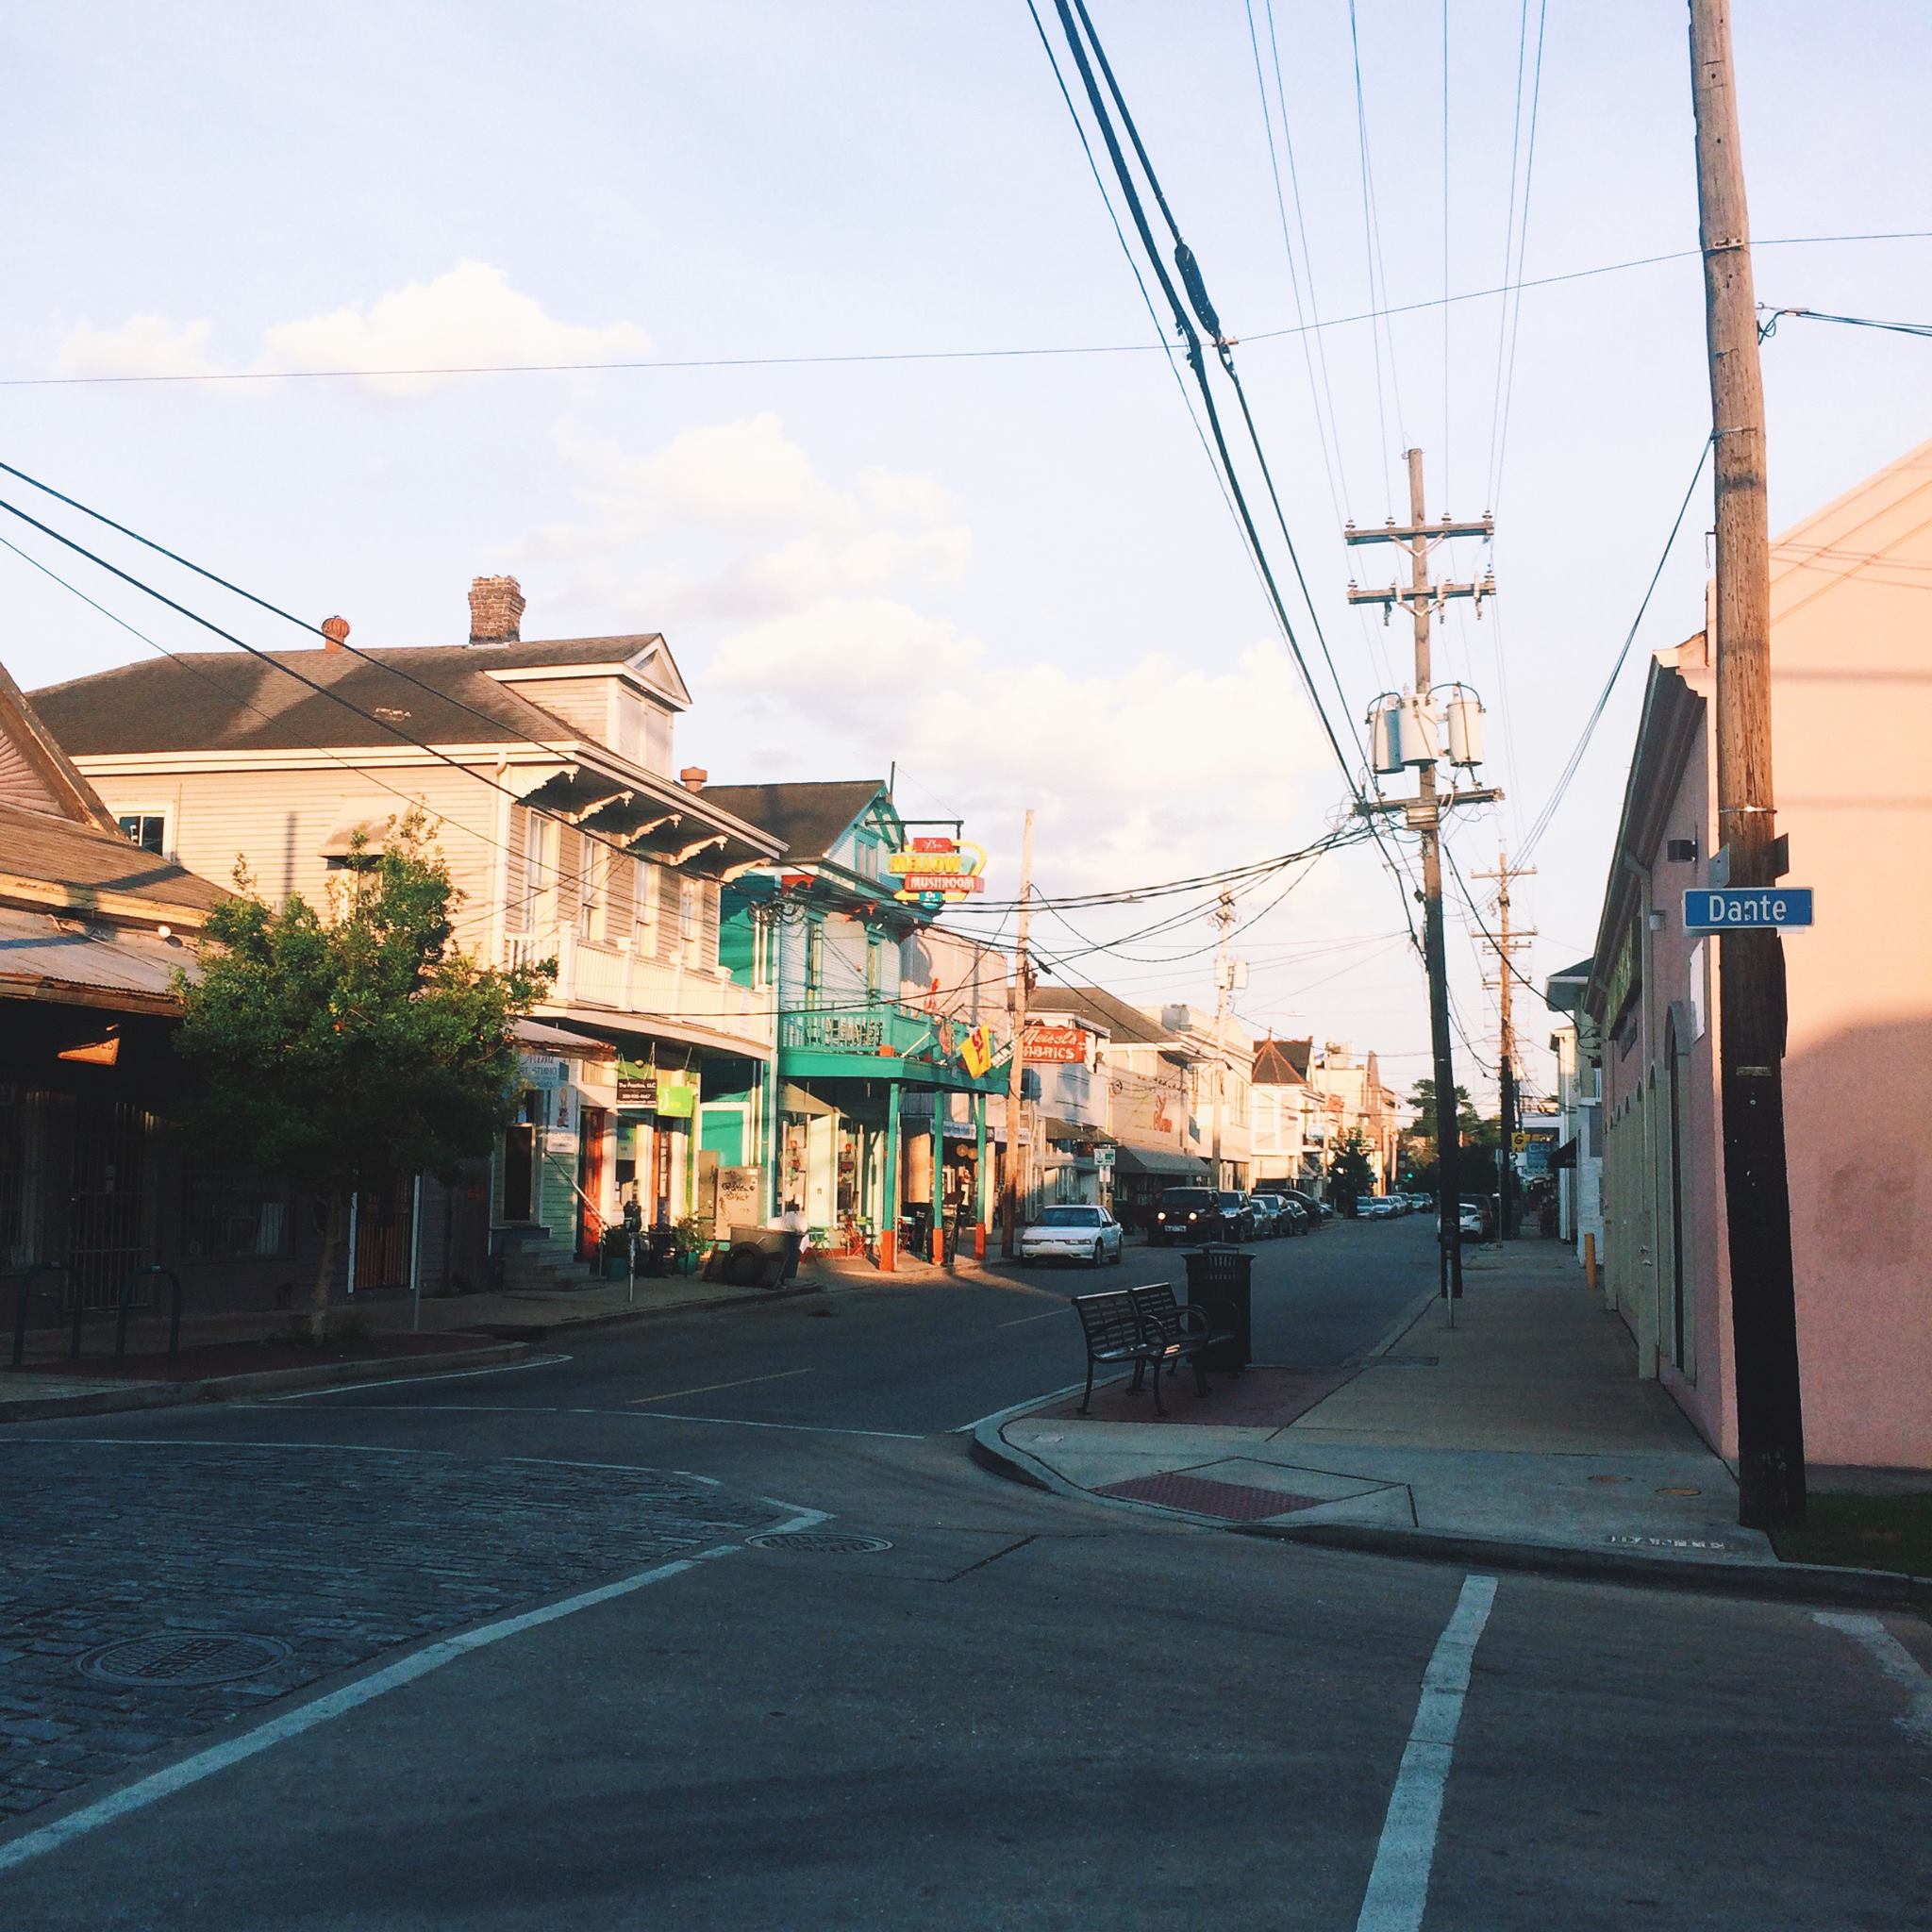 10 Most Popular Streets in New Orleans - Take a Walk Down New